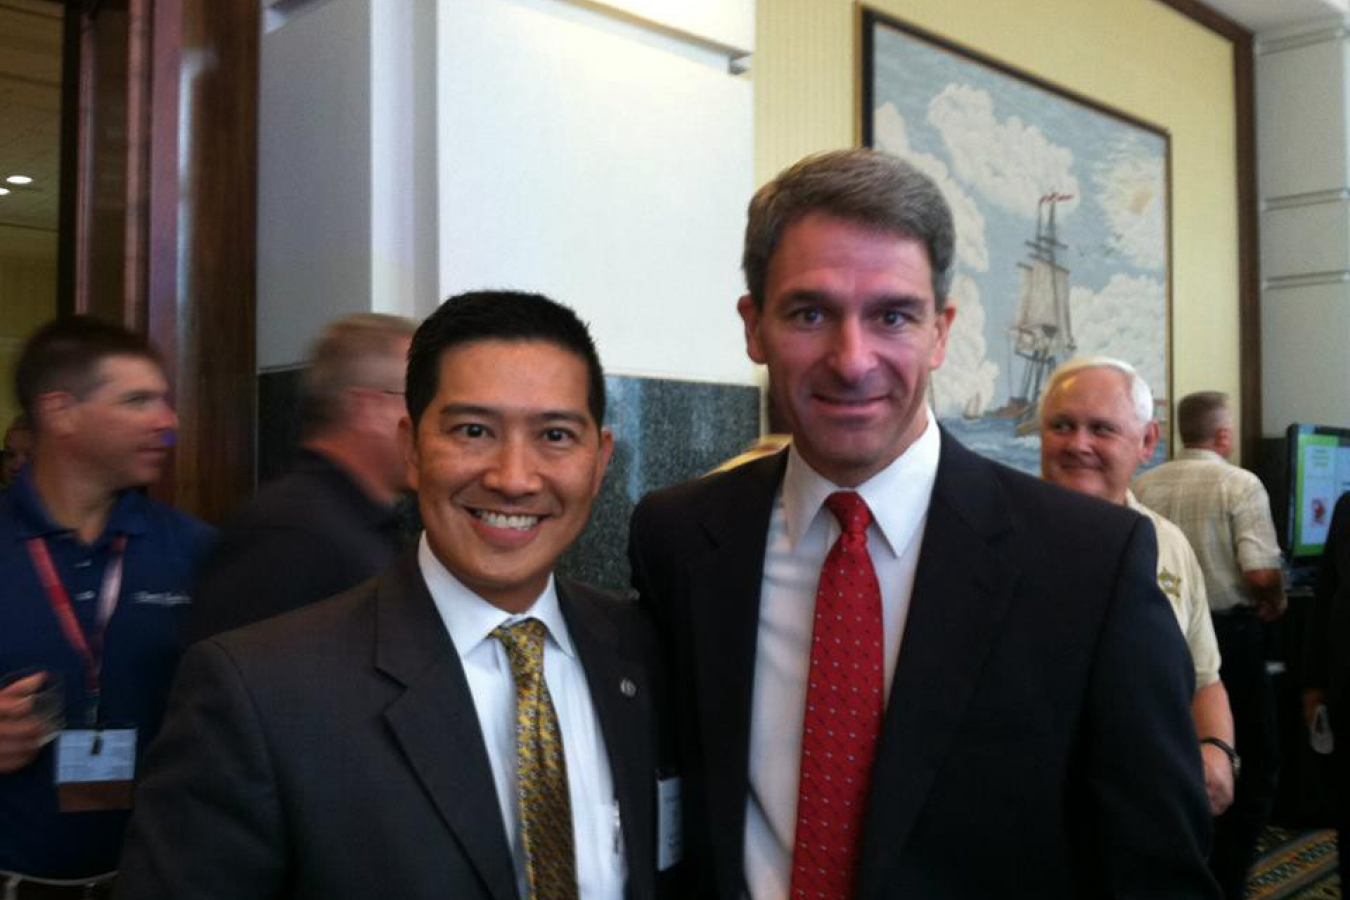 Tony Pham (left) Acting Director of ICE with Ken Cuccinelli Acting Director of USCIS